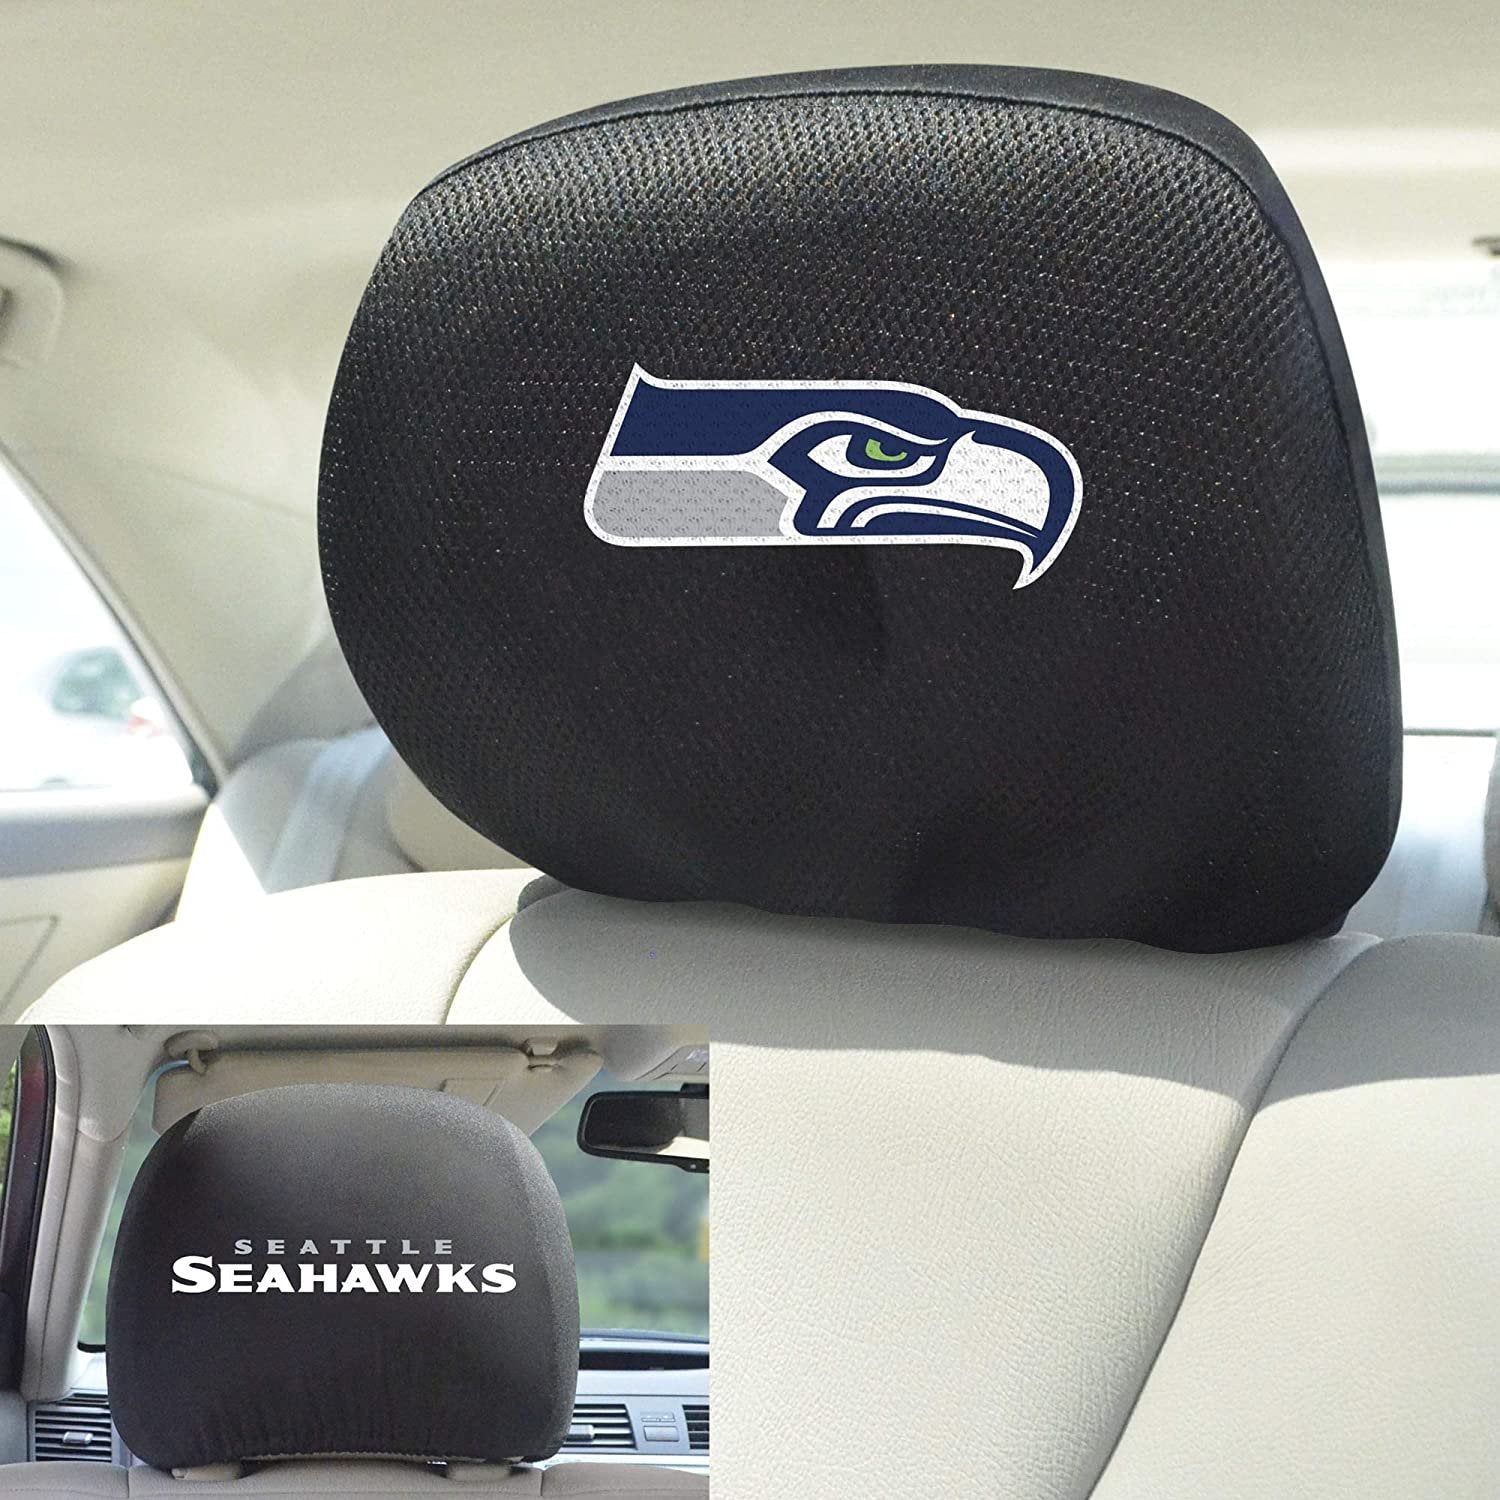 Seattle Seahawks Pair of Premium Auto Head Rest Covers, Embroidered, Black Elastic, 14x10 Inch